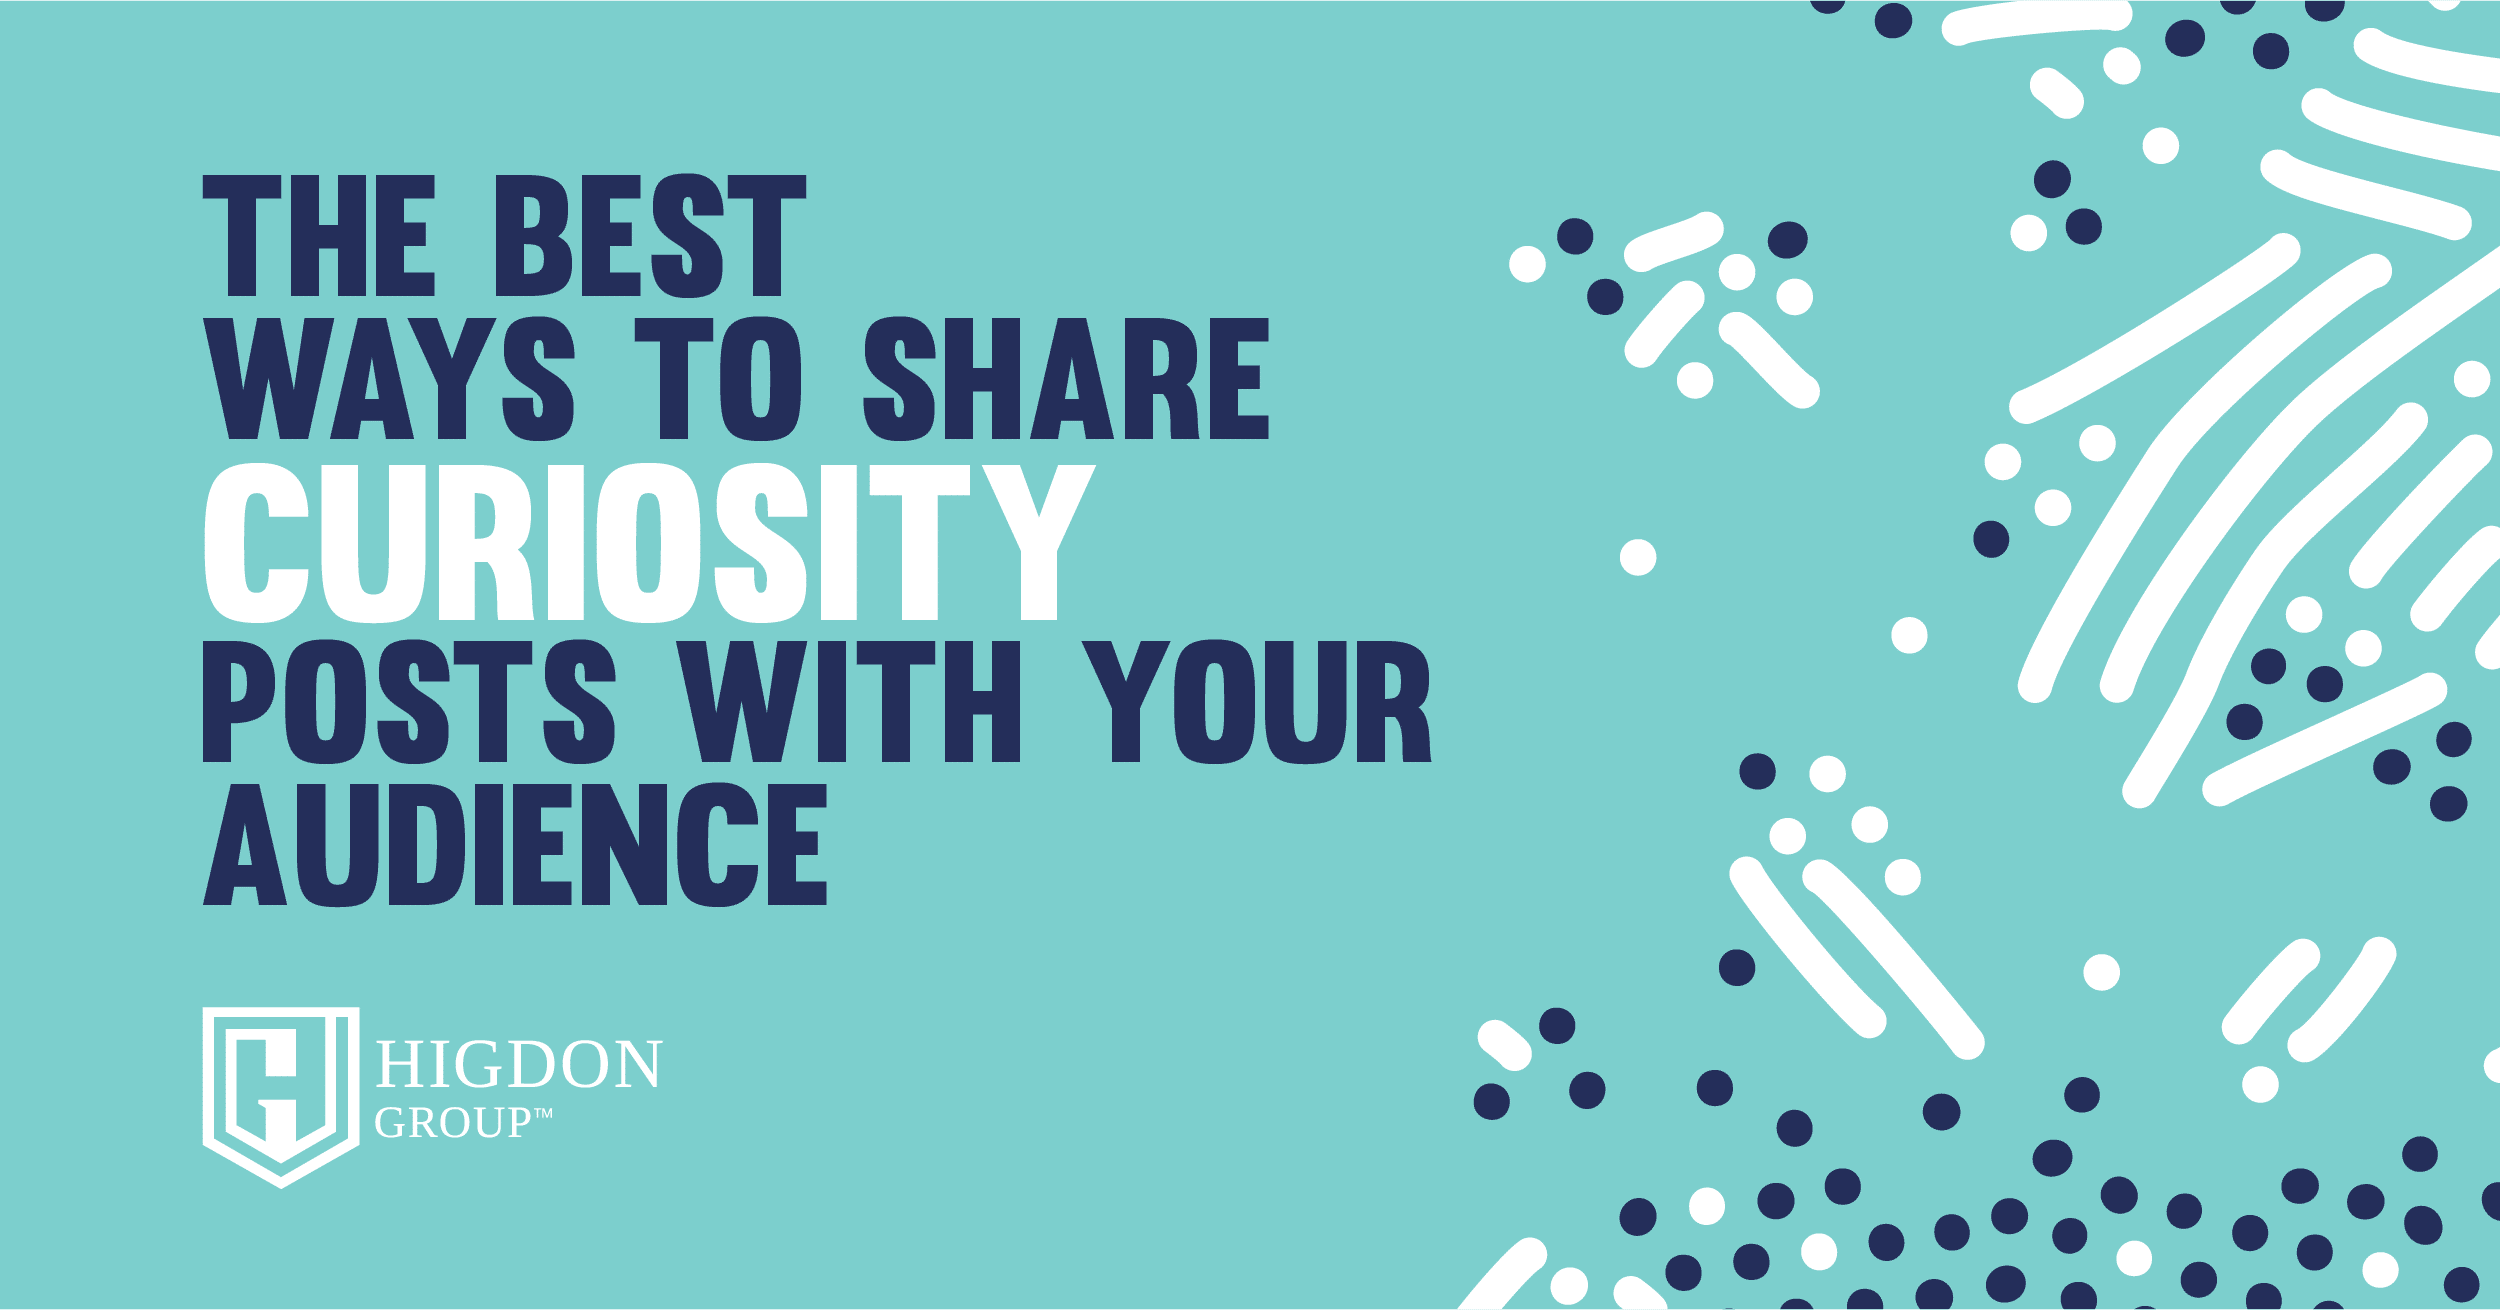 The Best Ways To Share Curiosity Posts with Your Audience